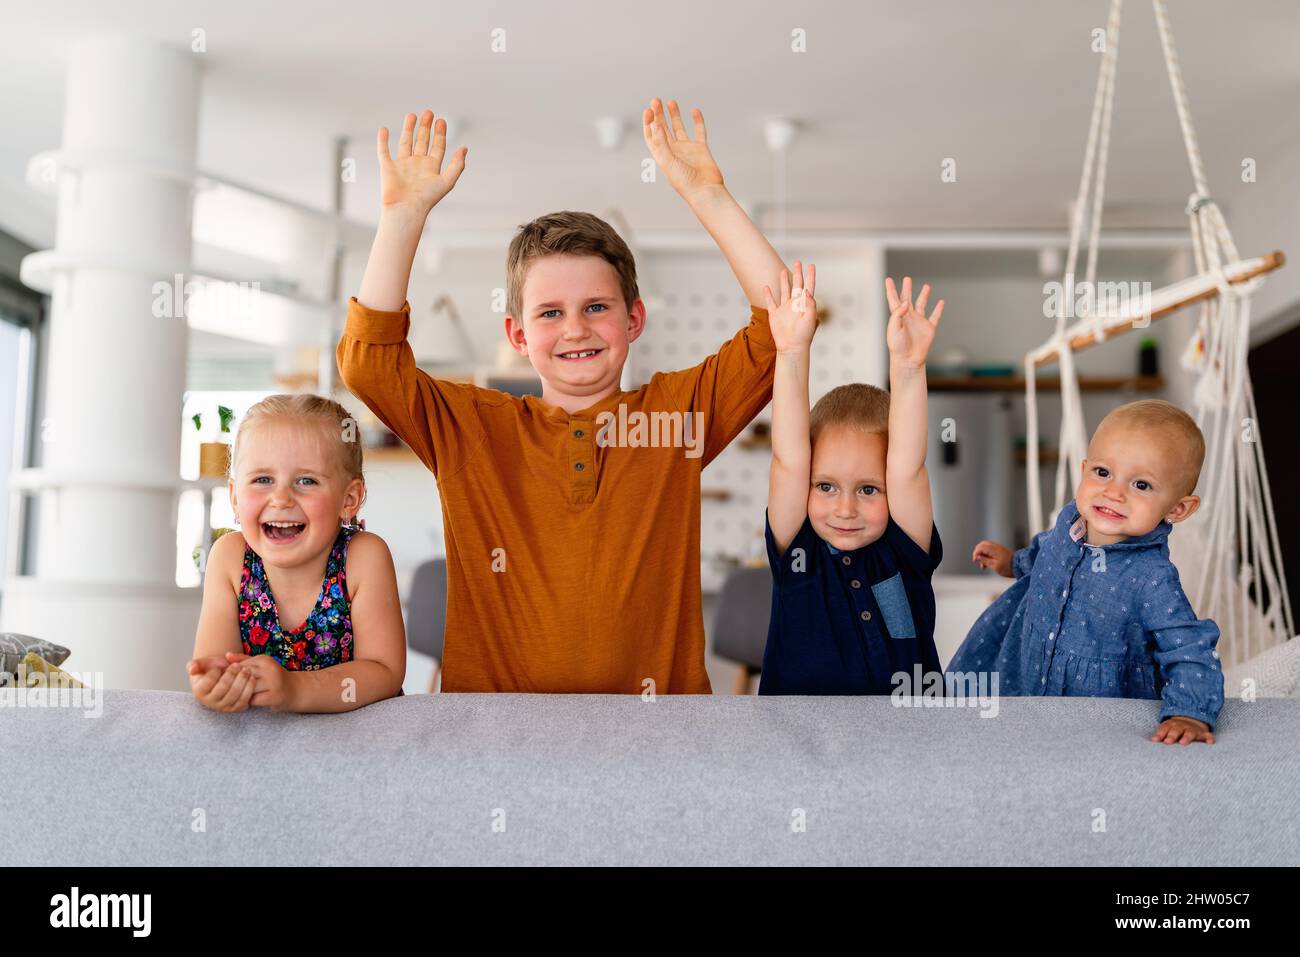 Group of little children having fun and smiling together indoors. Stock Photo